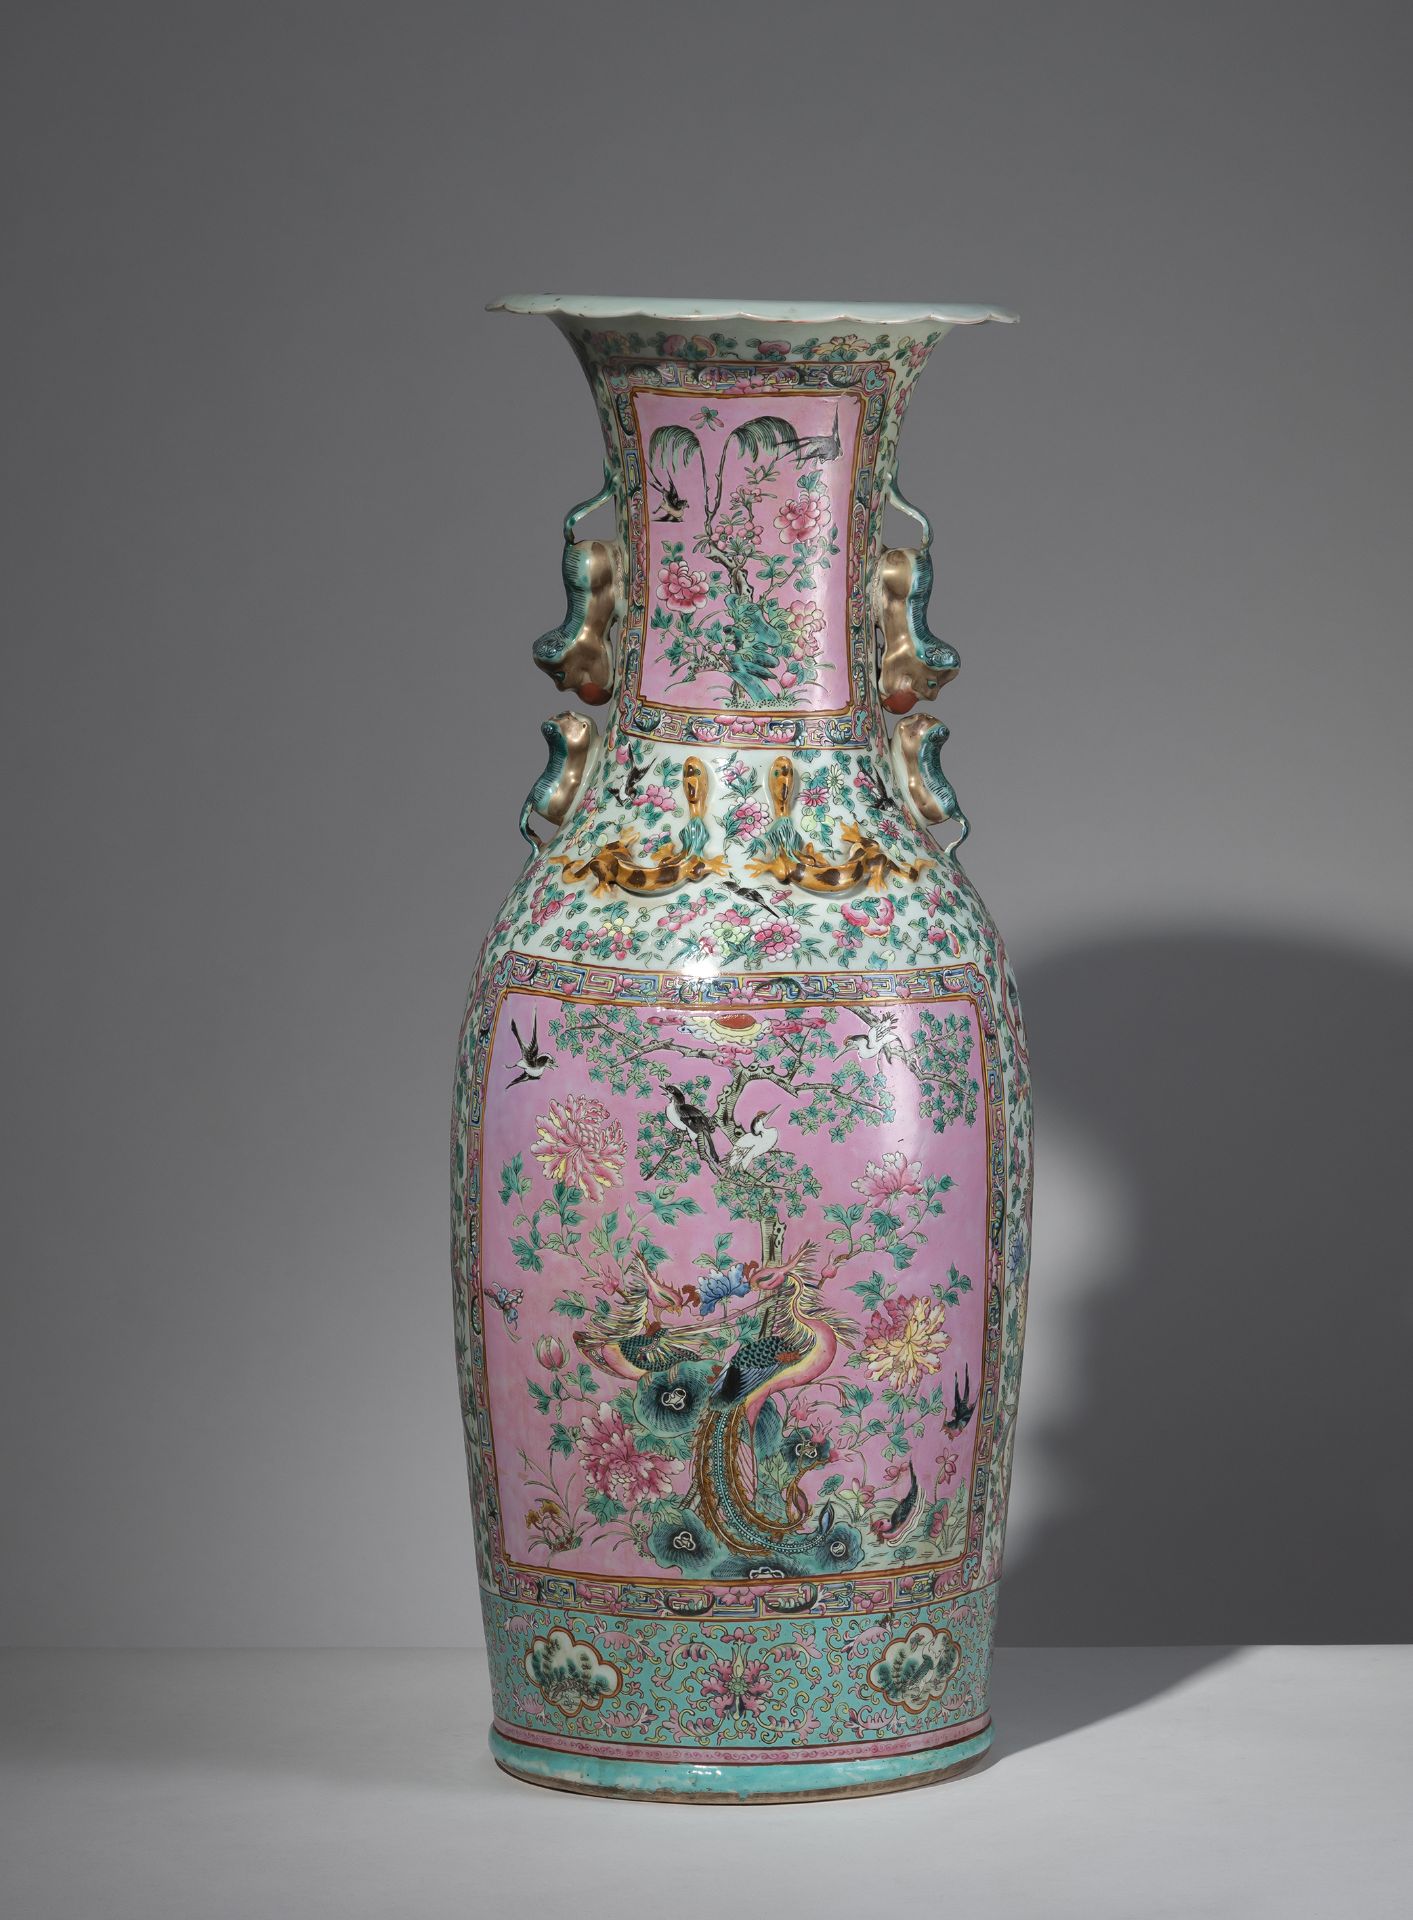 A LARGE 'FAMILLE ROSE' NYONYA STRAITS / PERANAKAN PORCELAIN VASE WITH PEACOCKS AND FLORAL SCROLLS